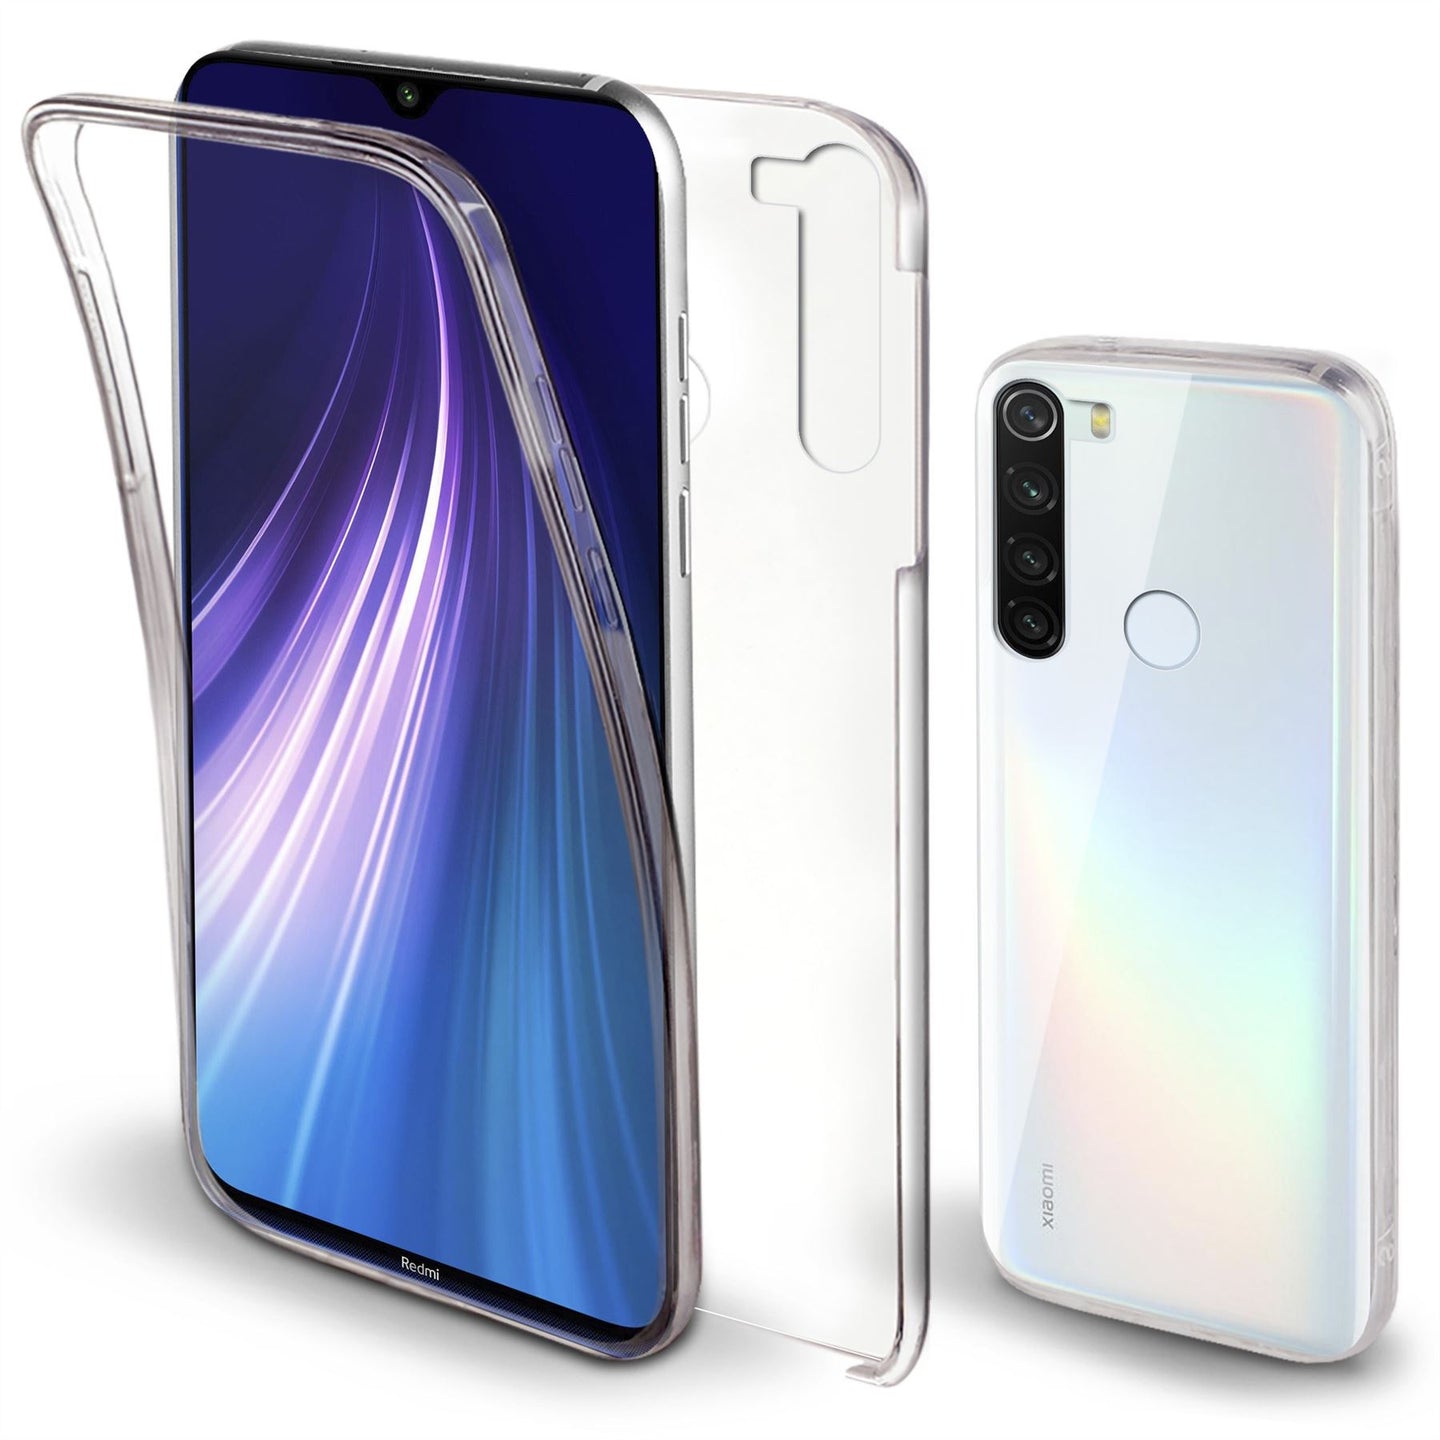 Moozy 360 Degree Case for Xiaomi Redmi Note 8T - Transparent Full body Slim Cover - Hard PC Back and Soft TPU Silicone Front